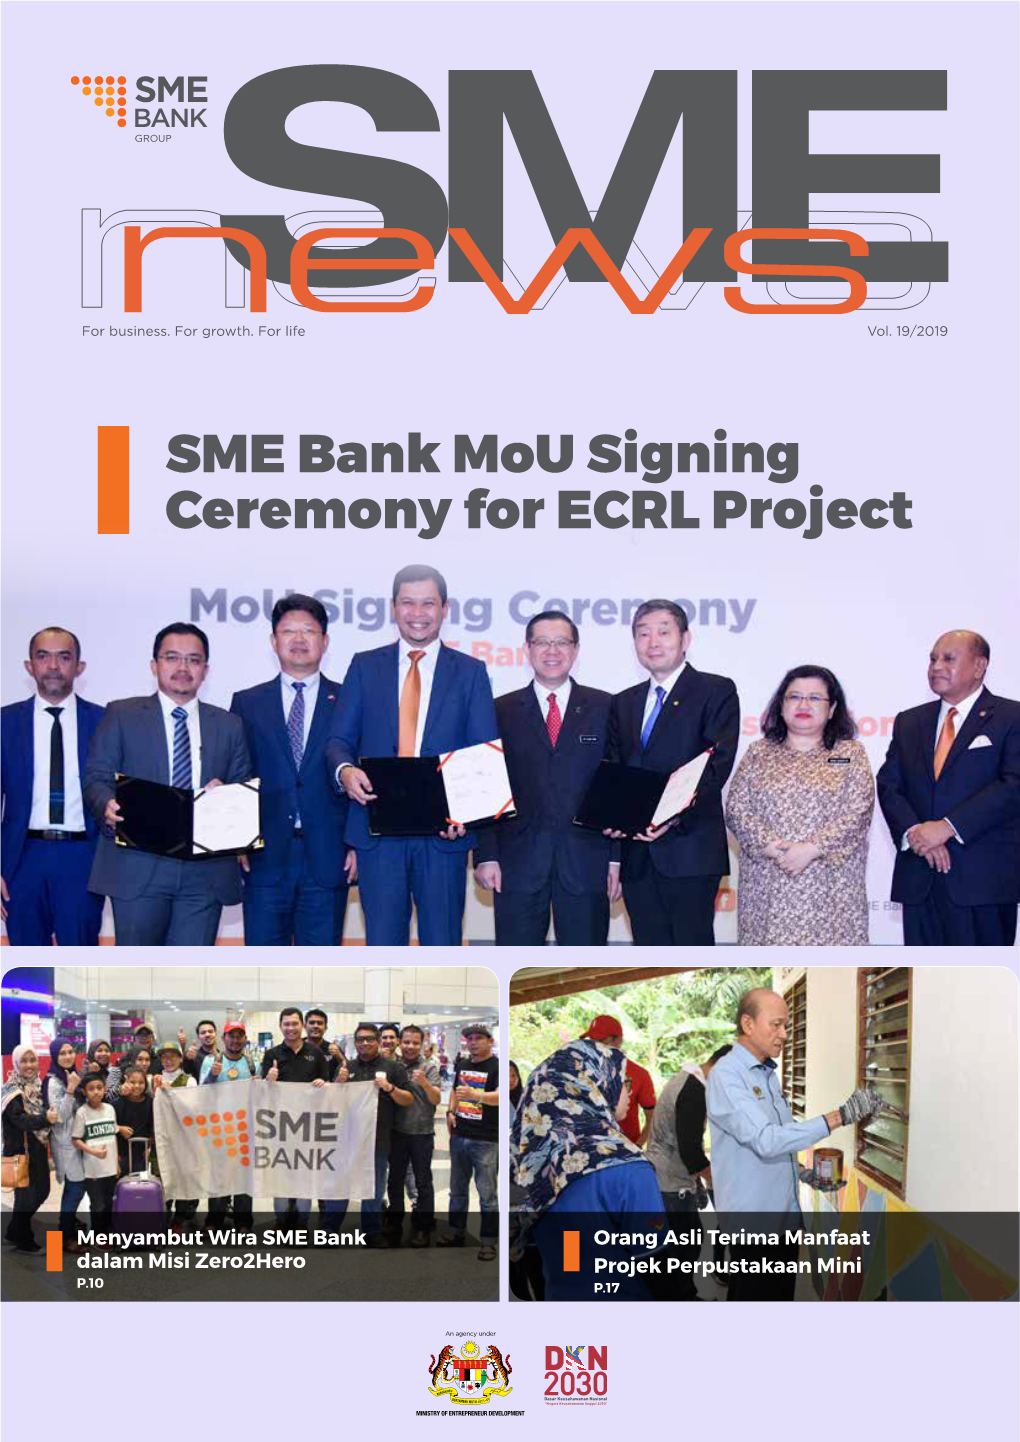 SME Bank Mou Signing Ceremony for ECRL Project